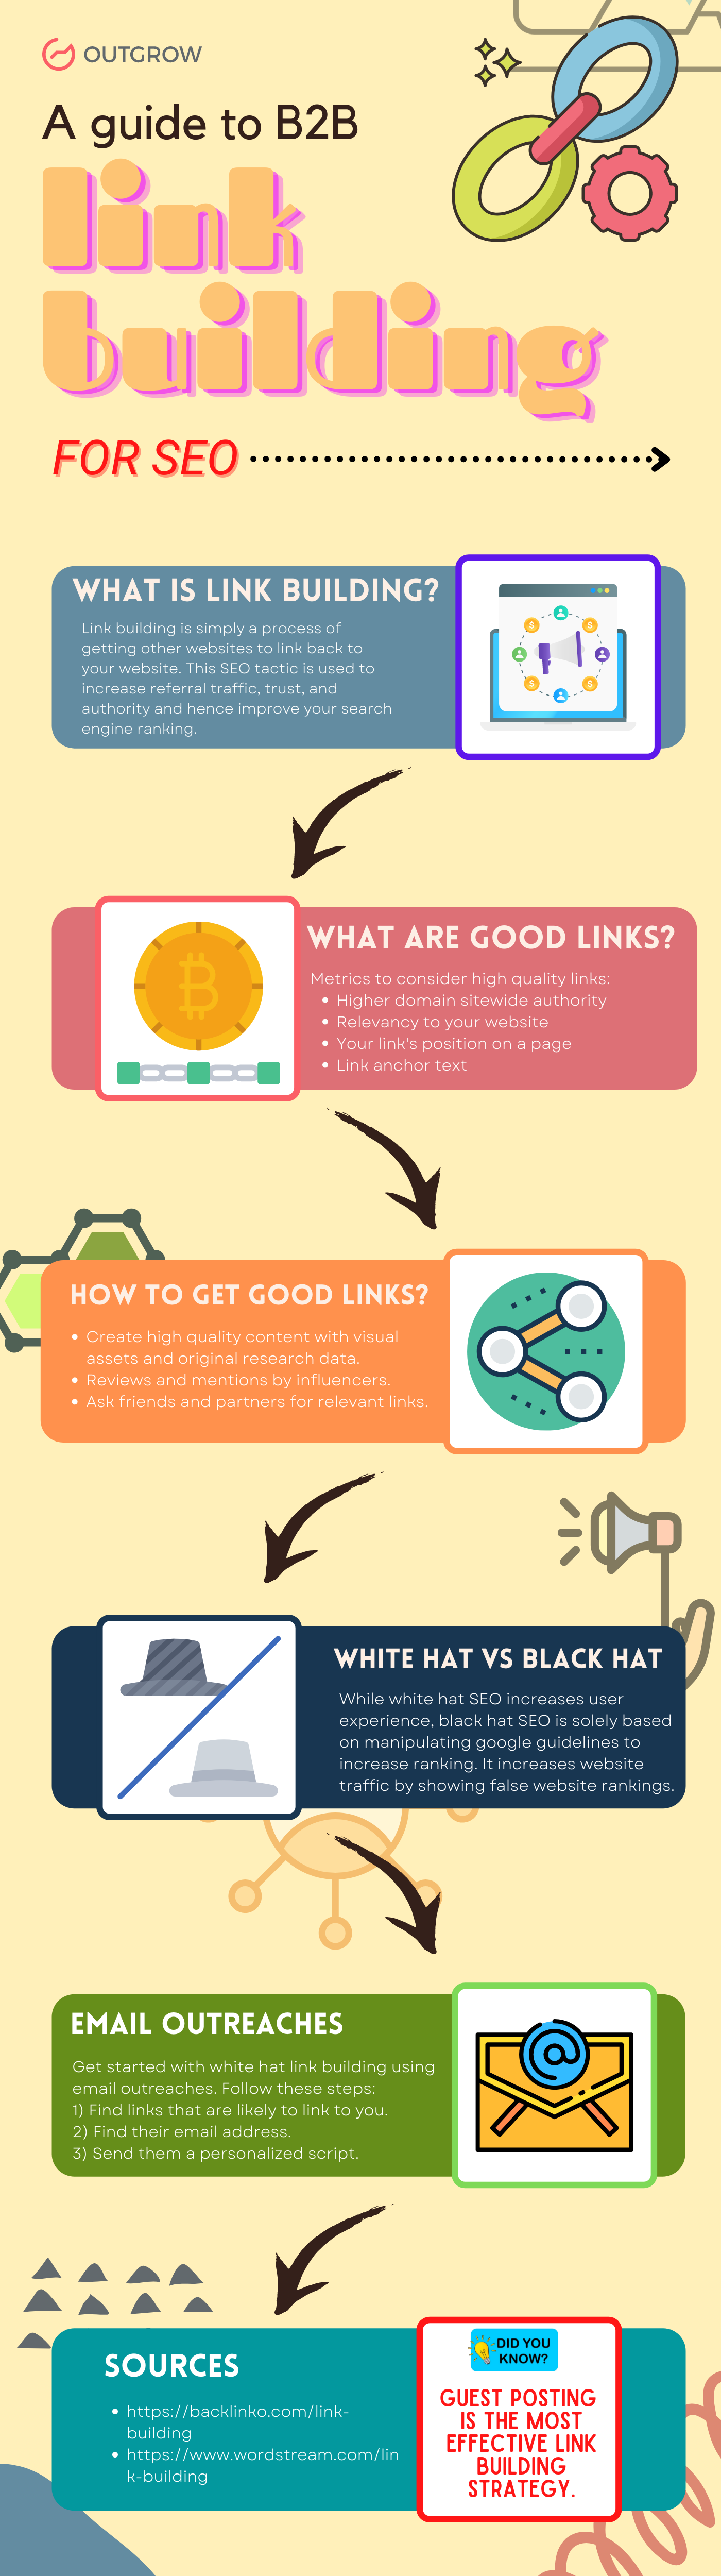 A Guide To B2B Link Building For SEO Infographic 